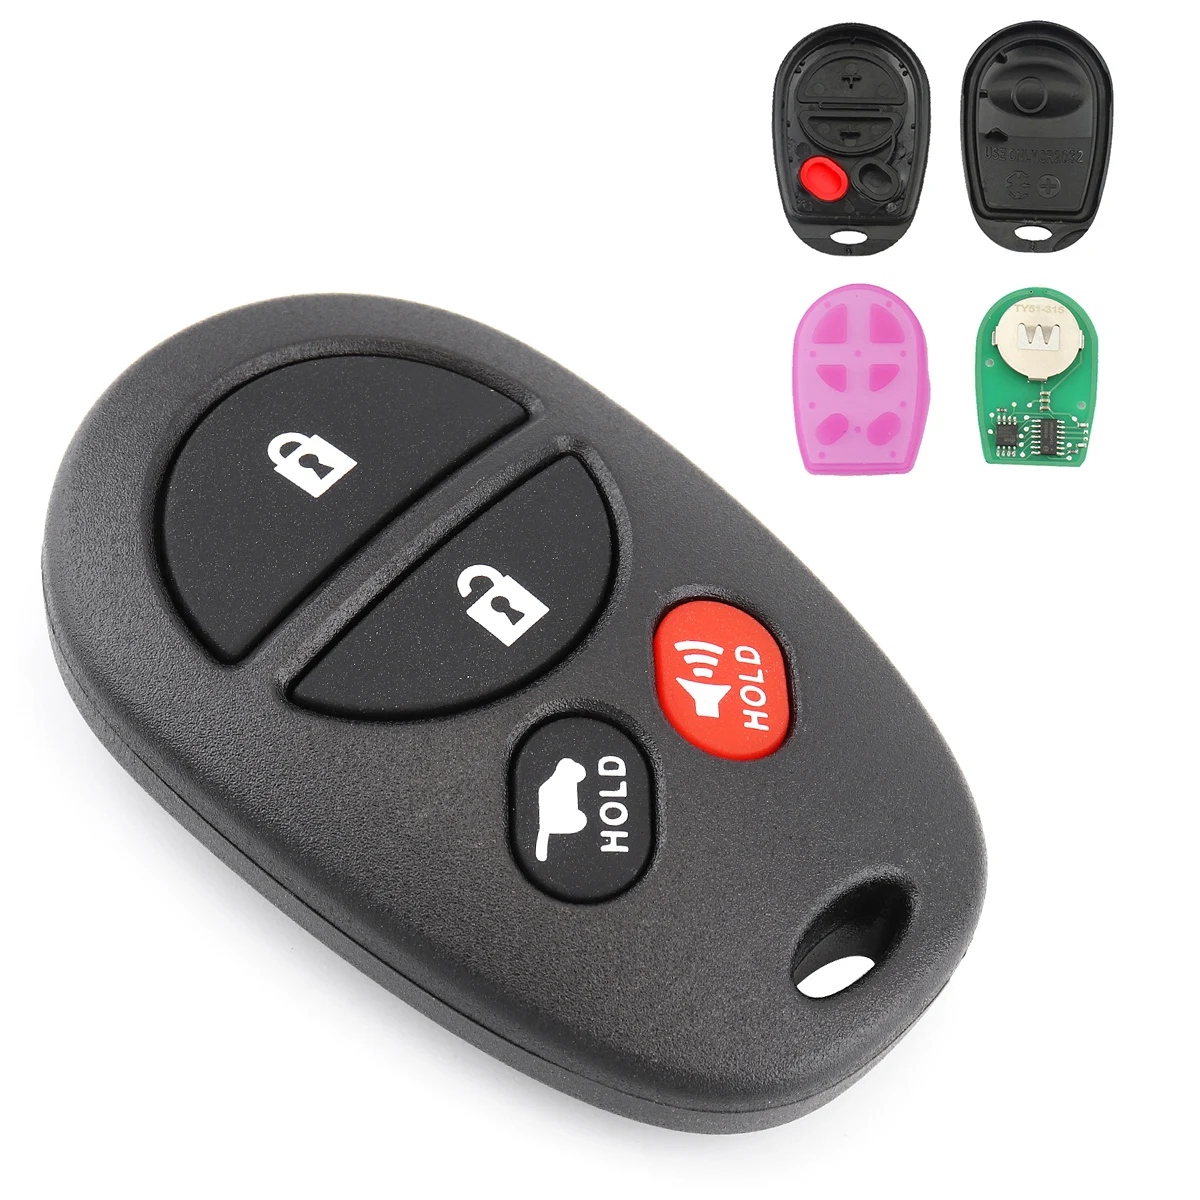 

315MHZ 4 Buttons Car Key Keyless Entry Remote Key Fob Replacement for Toyota Sienna Avalon Solara Sequoia Highlander 2004-2016